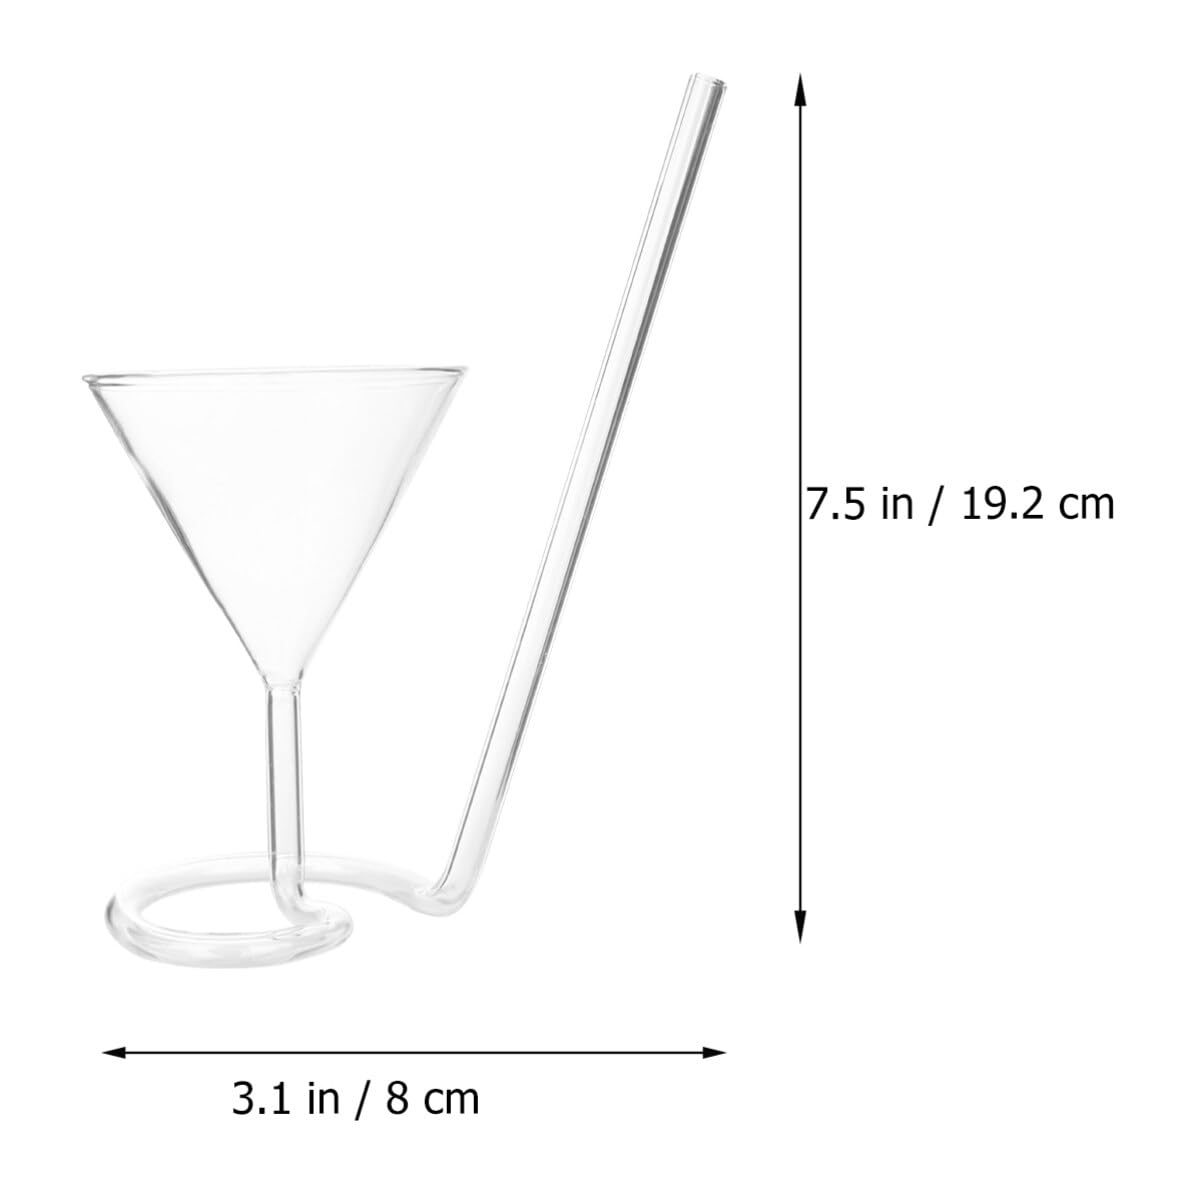 Kichvoe glass wine decanter milk cup cocktail glass built in straw martini gin Vampires Cocktails Wines Glasses whiskey cup wine goblet glasses drinking cup to rotate coffee cup